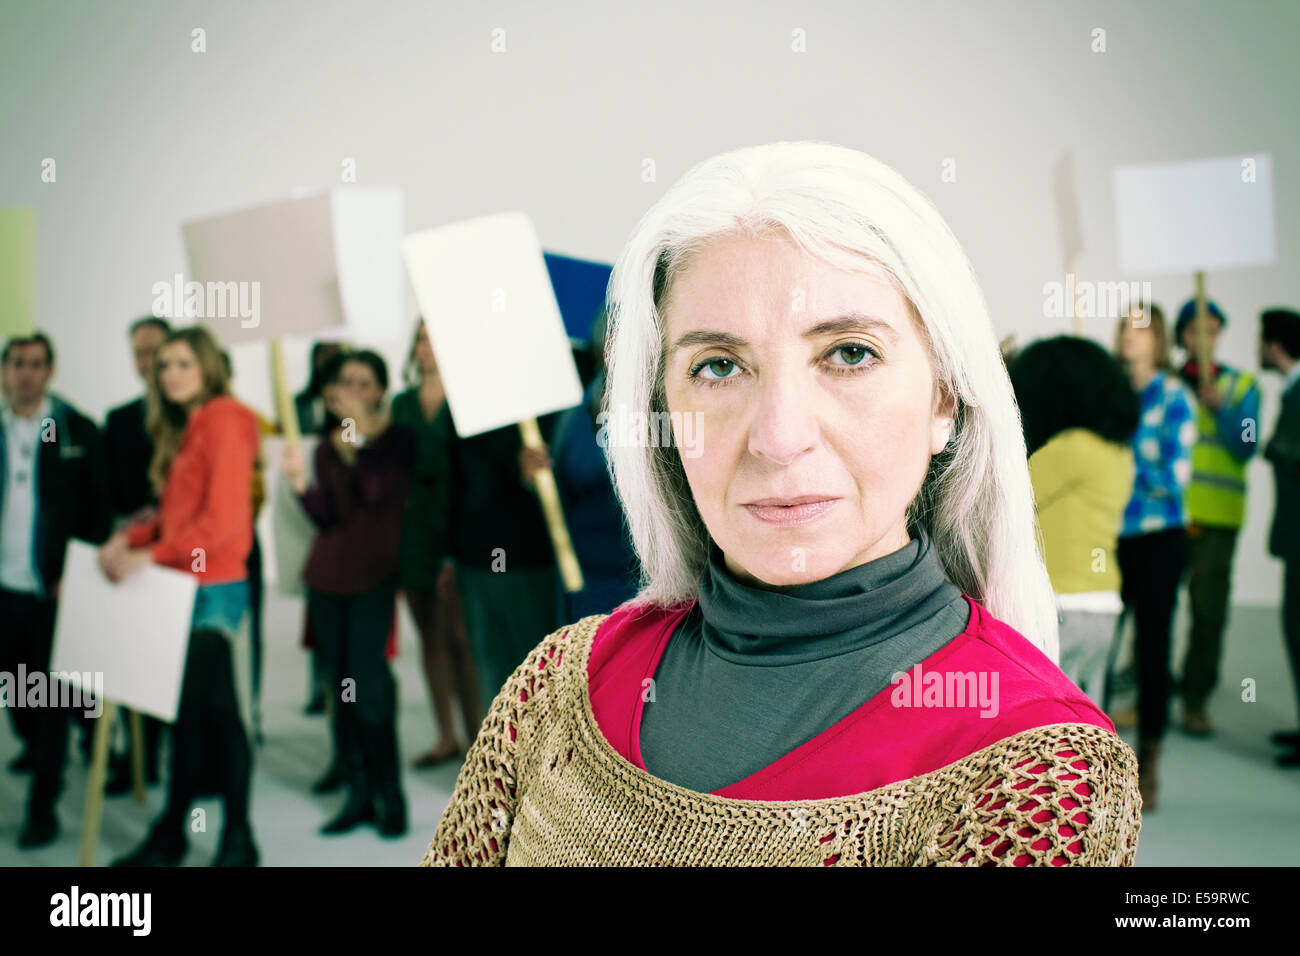 Portrait of serious woman with protesters in background Stock Photo